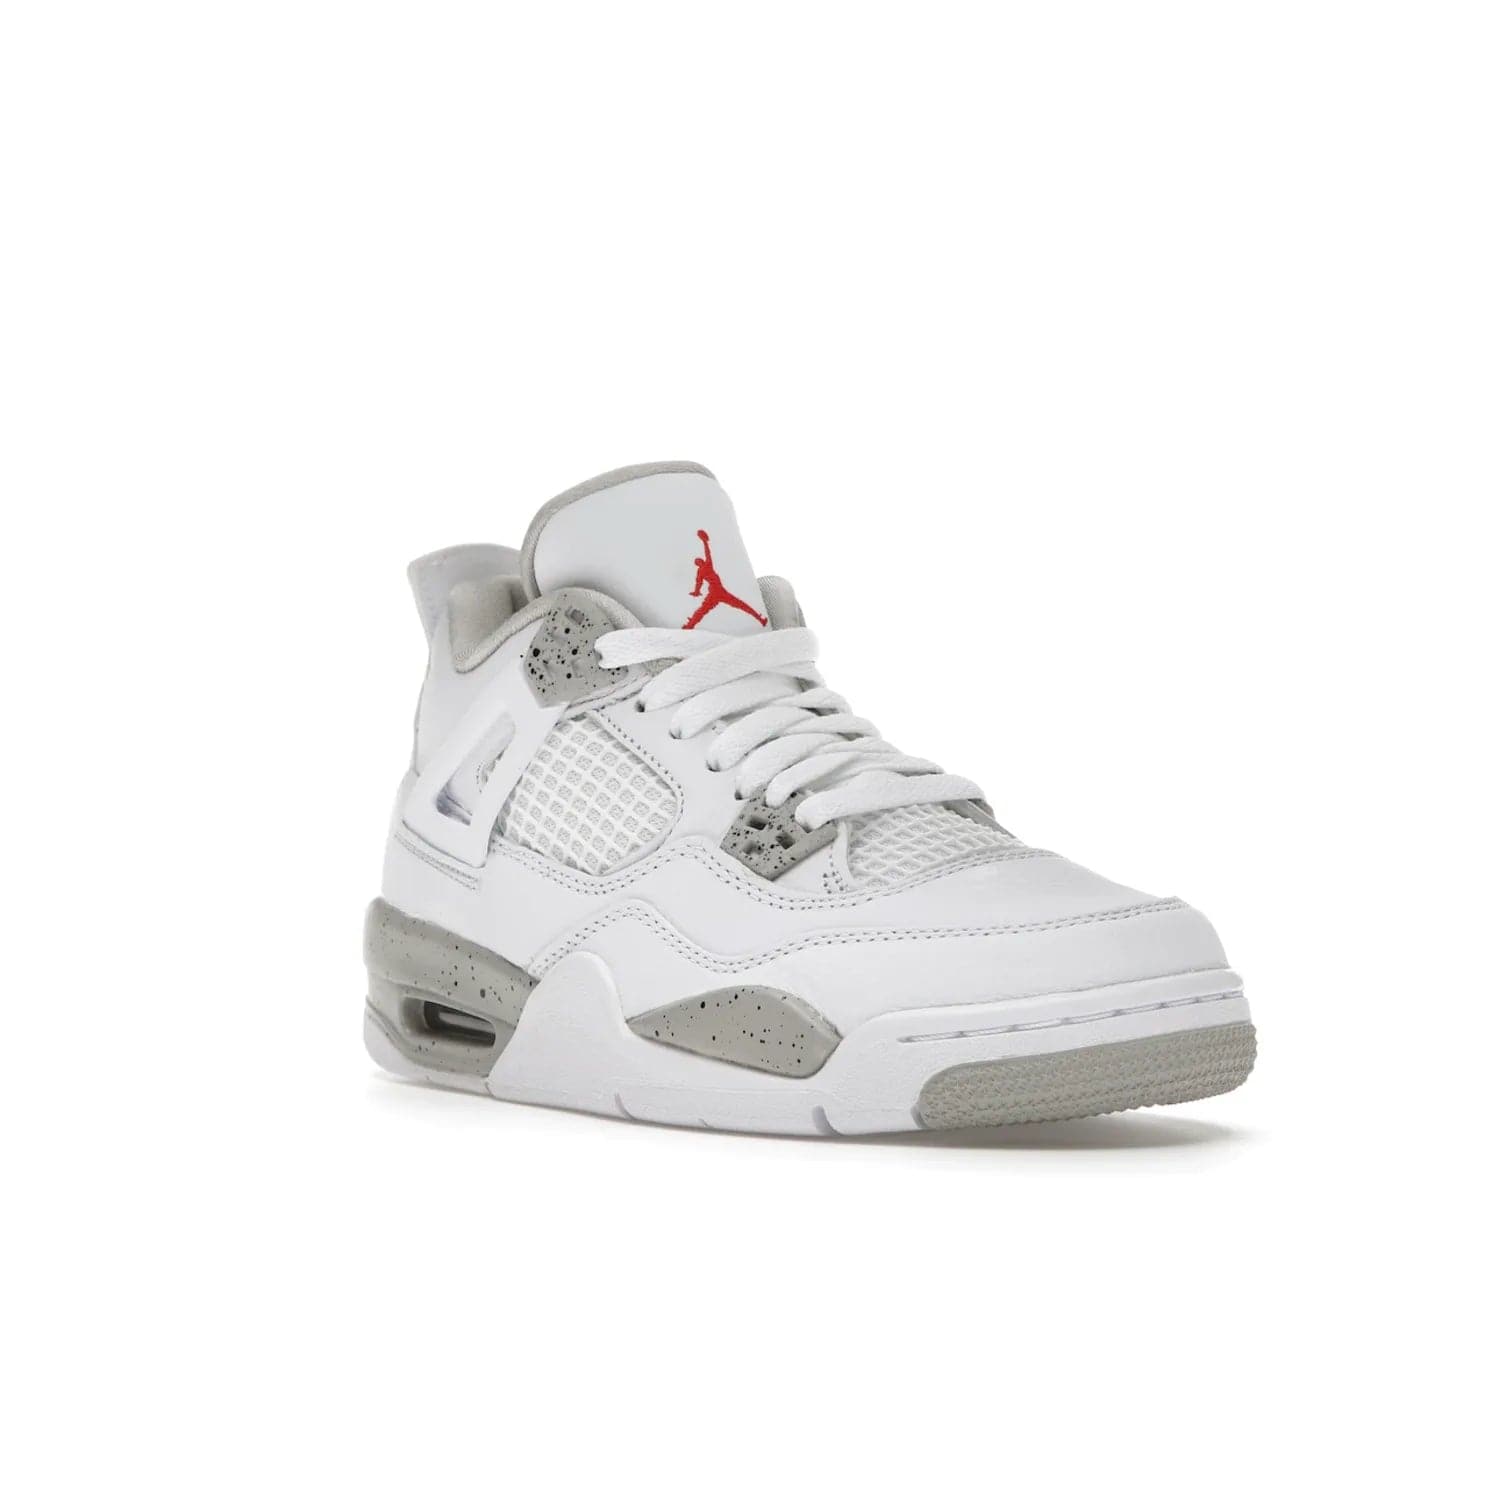 Jordan 4 Retro White Oreo (2021) (GS) - Image 6 - Only at www.BallersClubKickz.com - White Oreo Air Jordan 4 Retro 2021 GS - Iconic sneaker silhouette with white canvas upper, Tech Grey detailing, and Fire Red accents. Available July 2021.